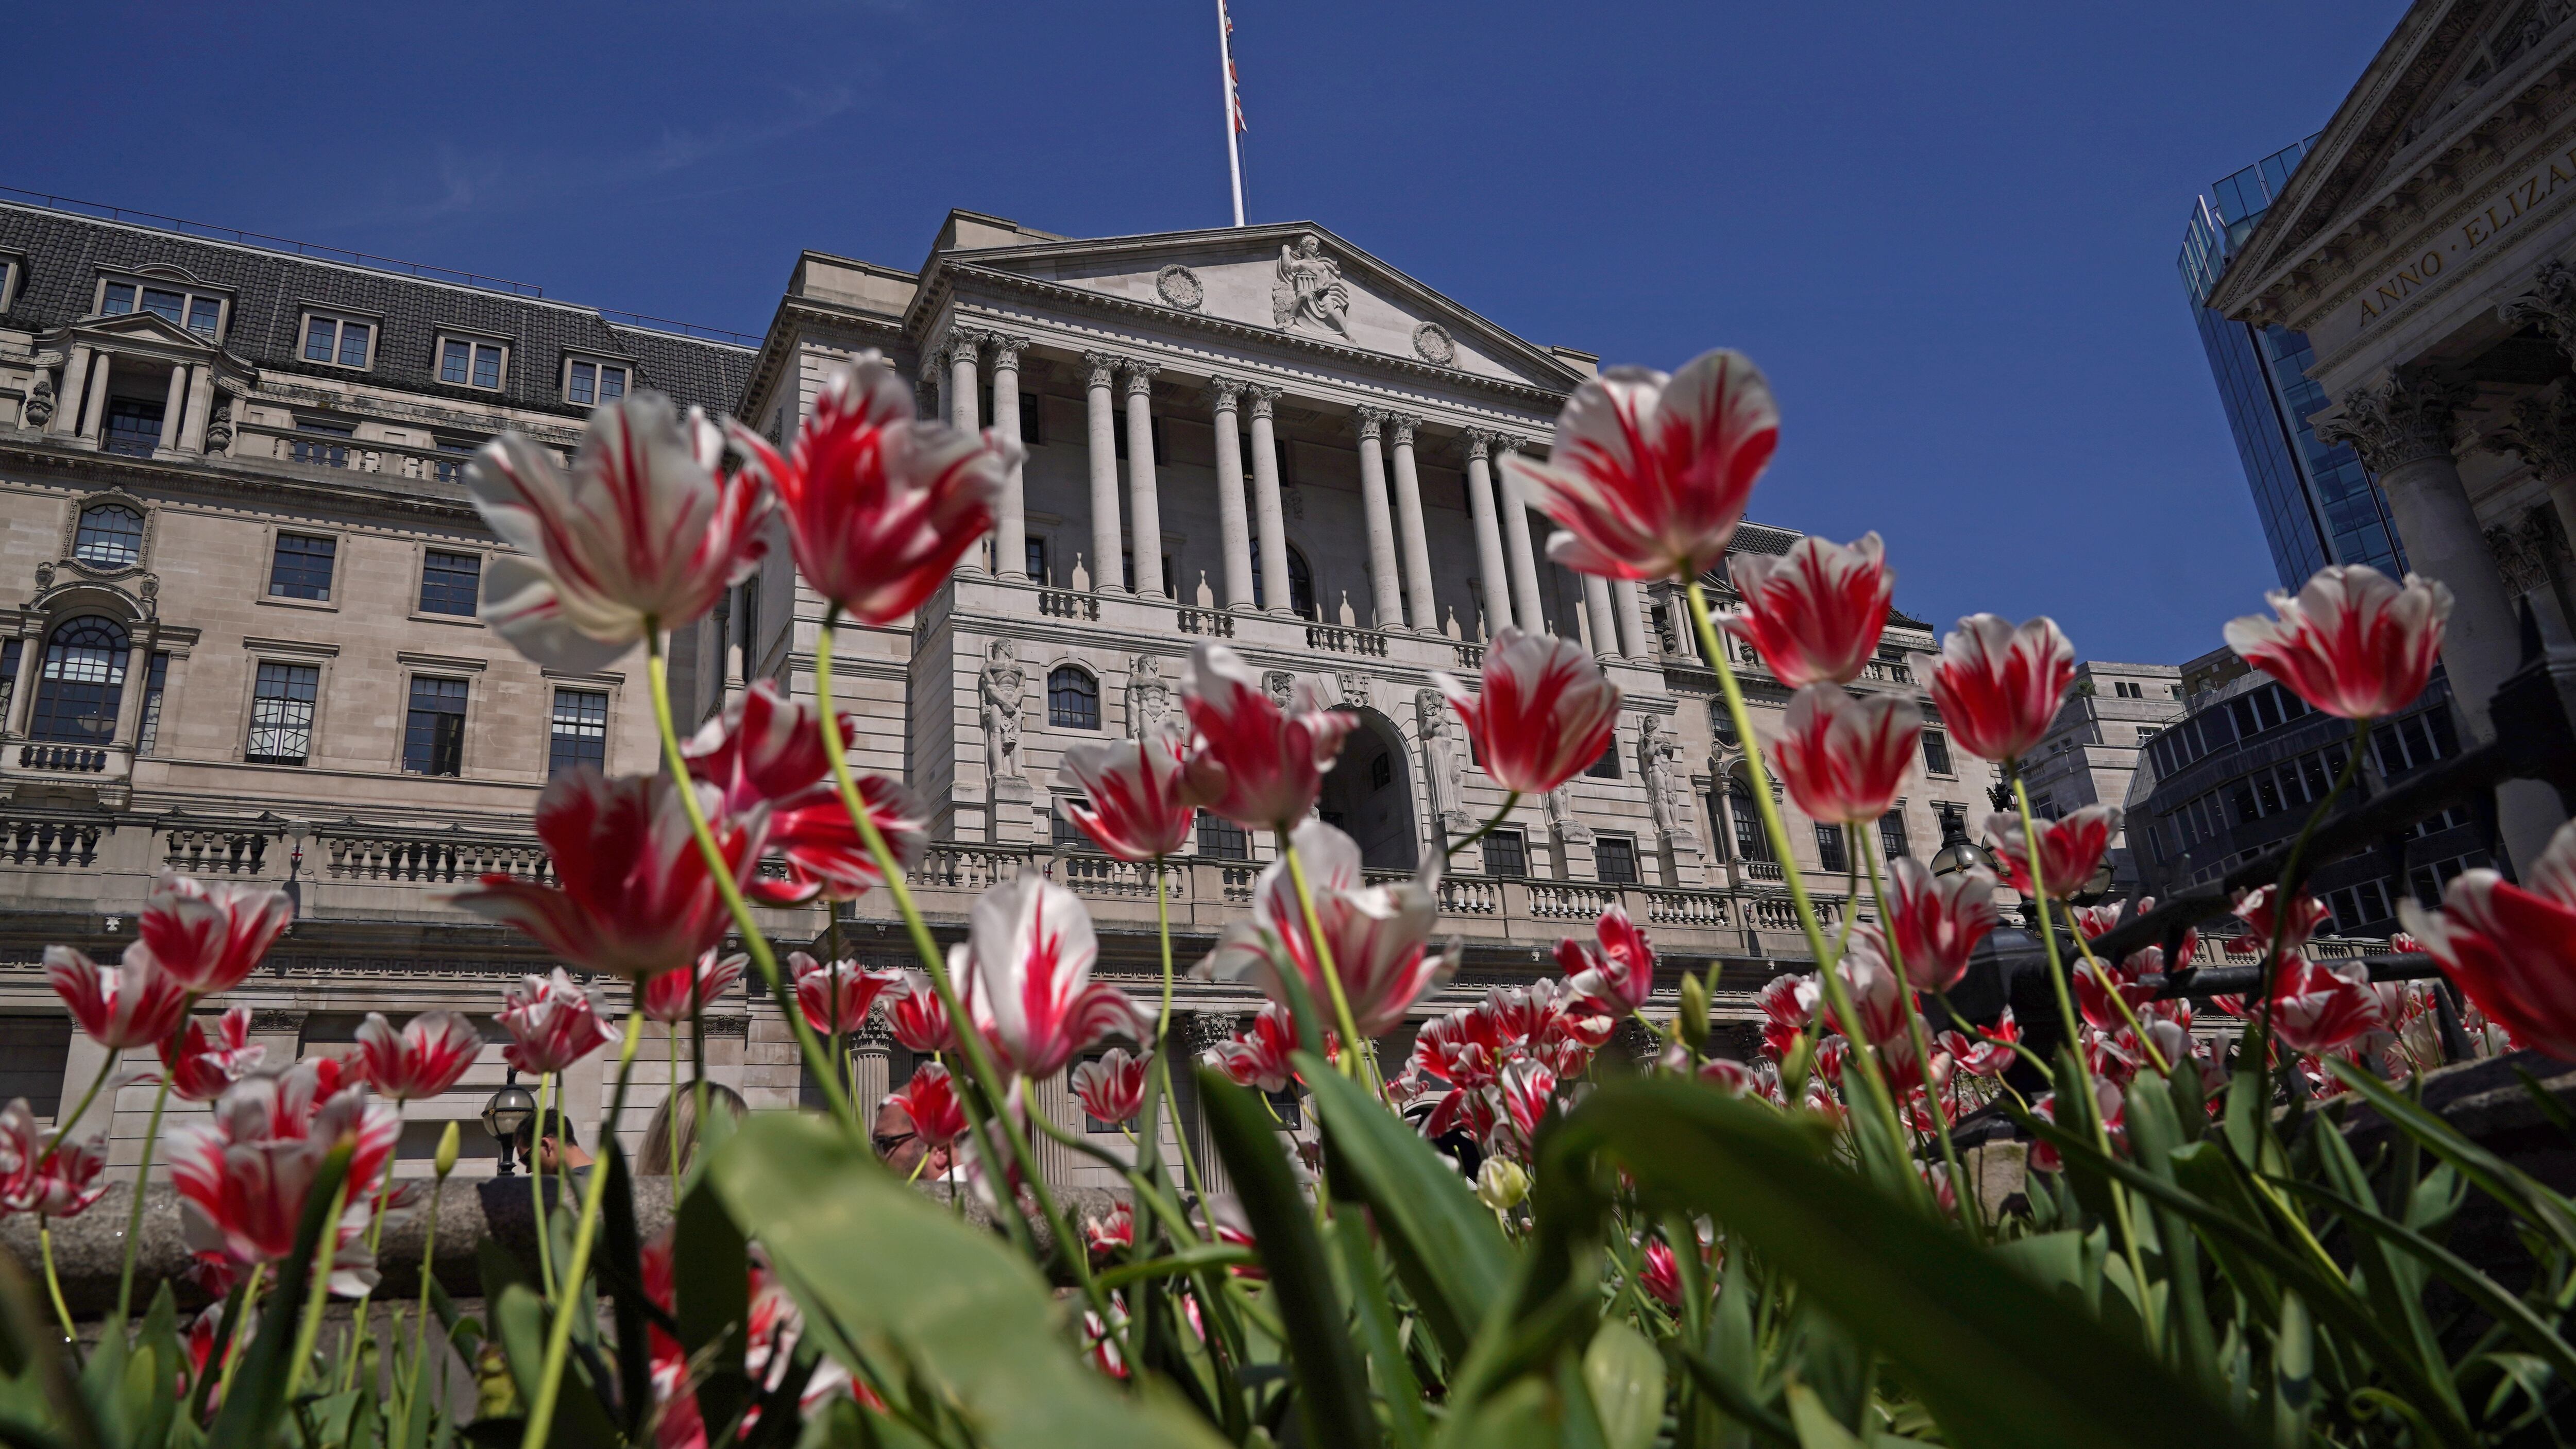 The Bank of England has said it is not ruling out cutting UK interest rates next month